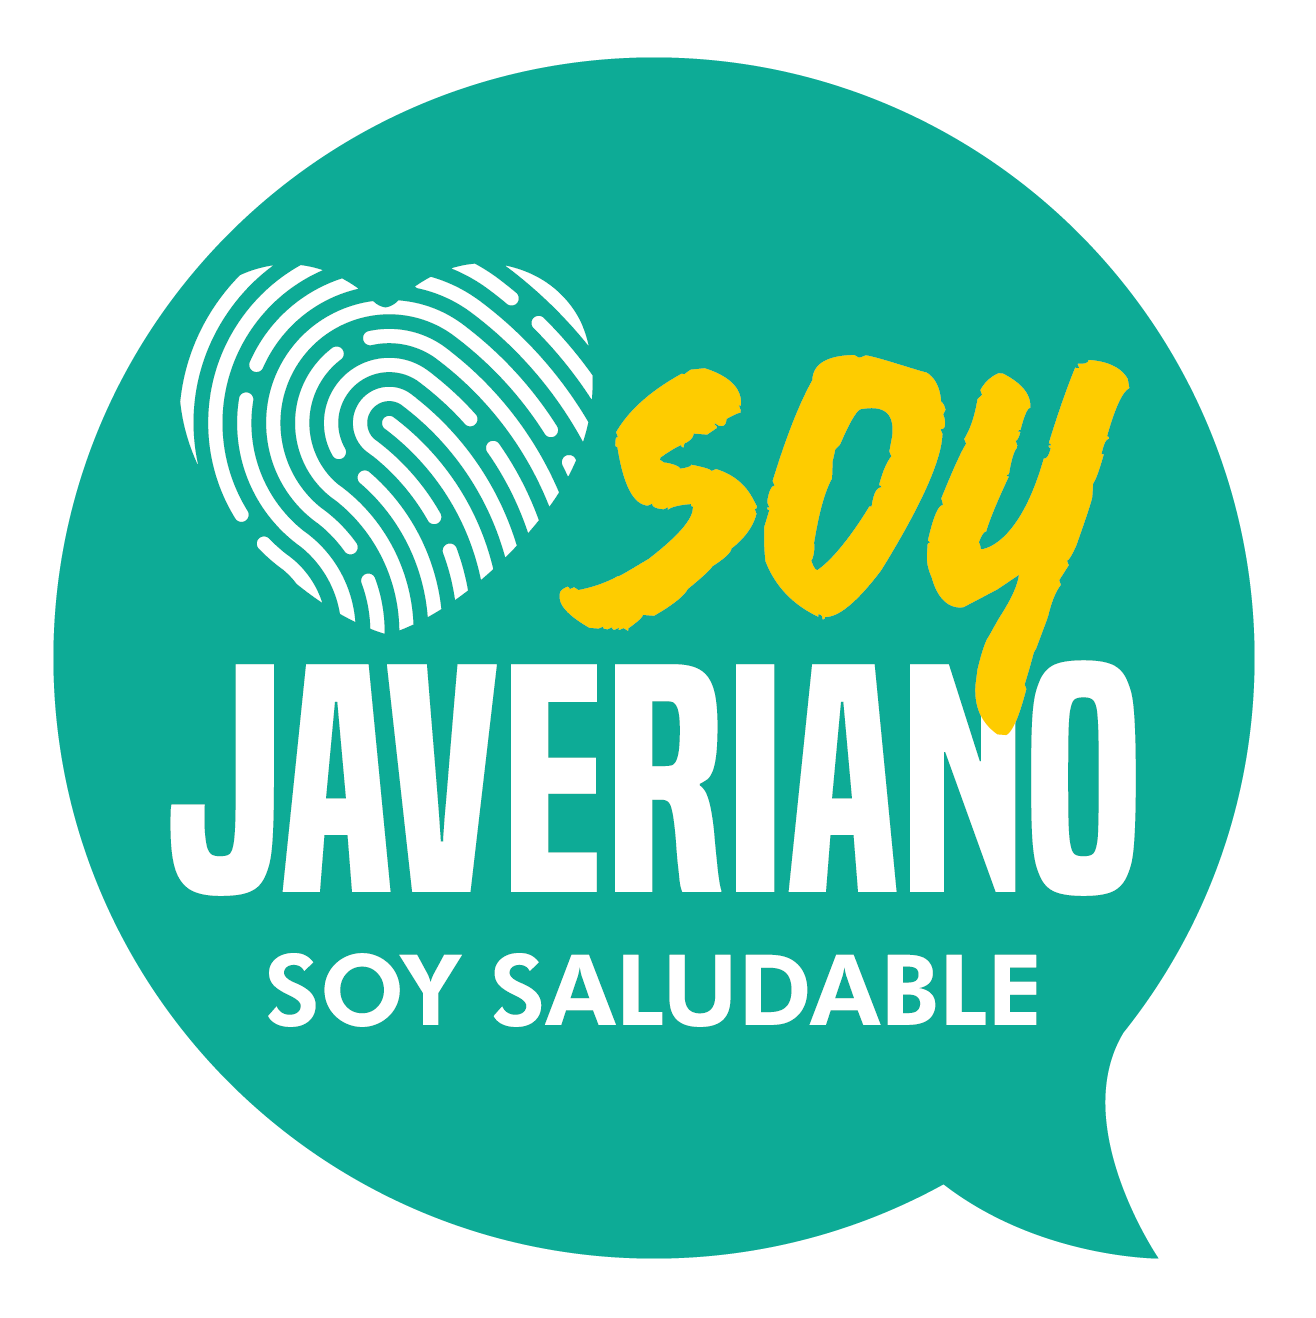 Soy Saludable